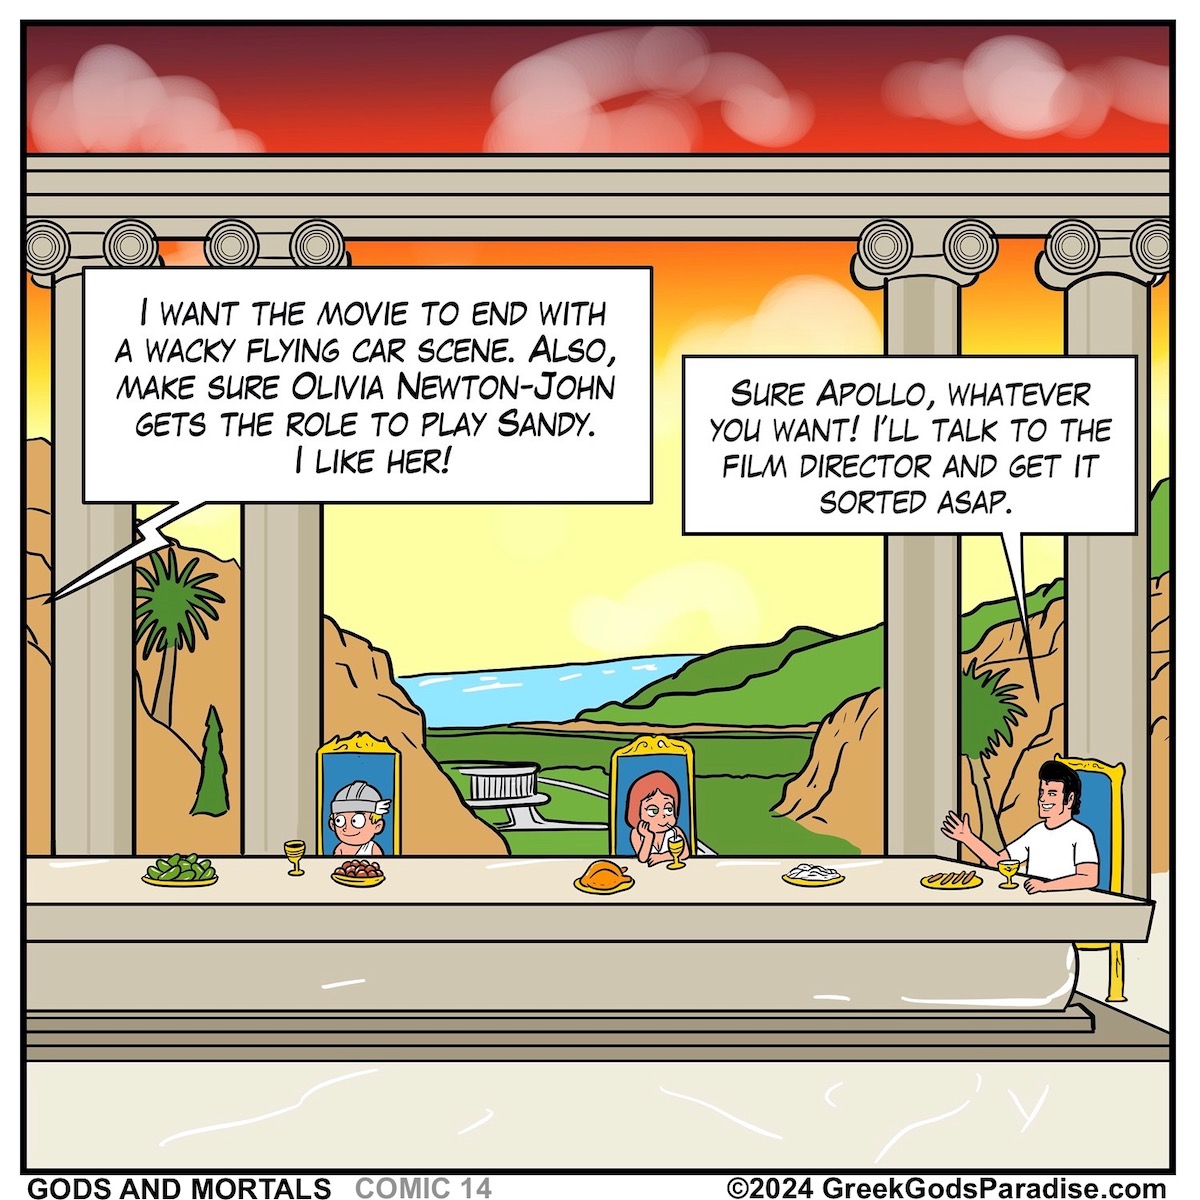 Comic scene showing John Travolta in Olympus eating with the Greek Gods Athena Hermes and Apollo